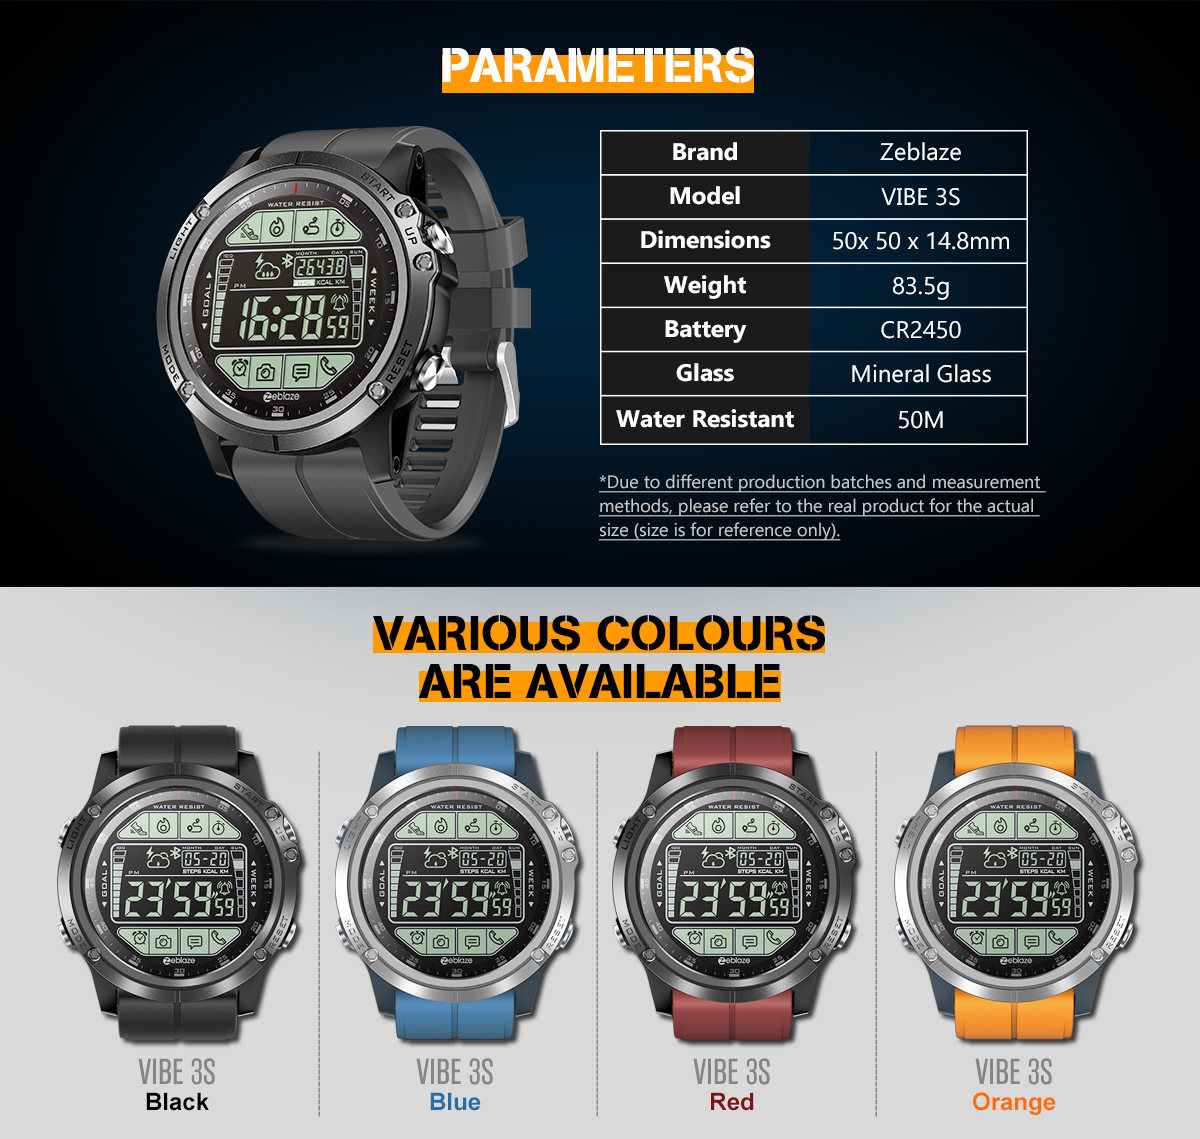 Zeblaze VIBE 3S Absolute Toughness Real-time Weather Display Goals Setting Message Reminder 1.24inch FSTN Full View Display Outdoor Sport Smart Watch 25